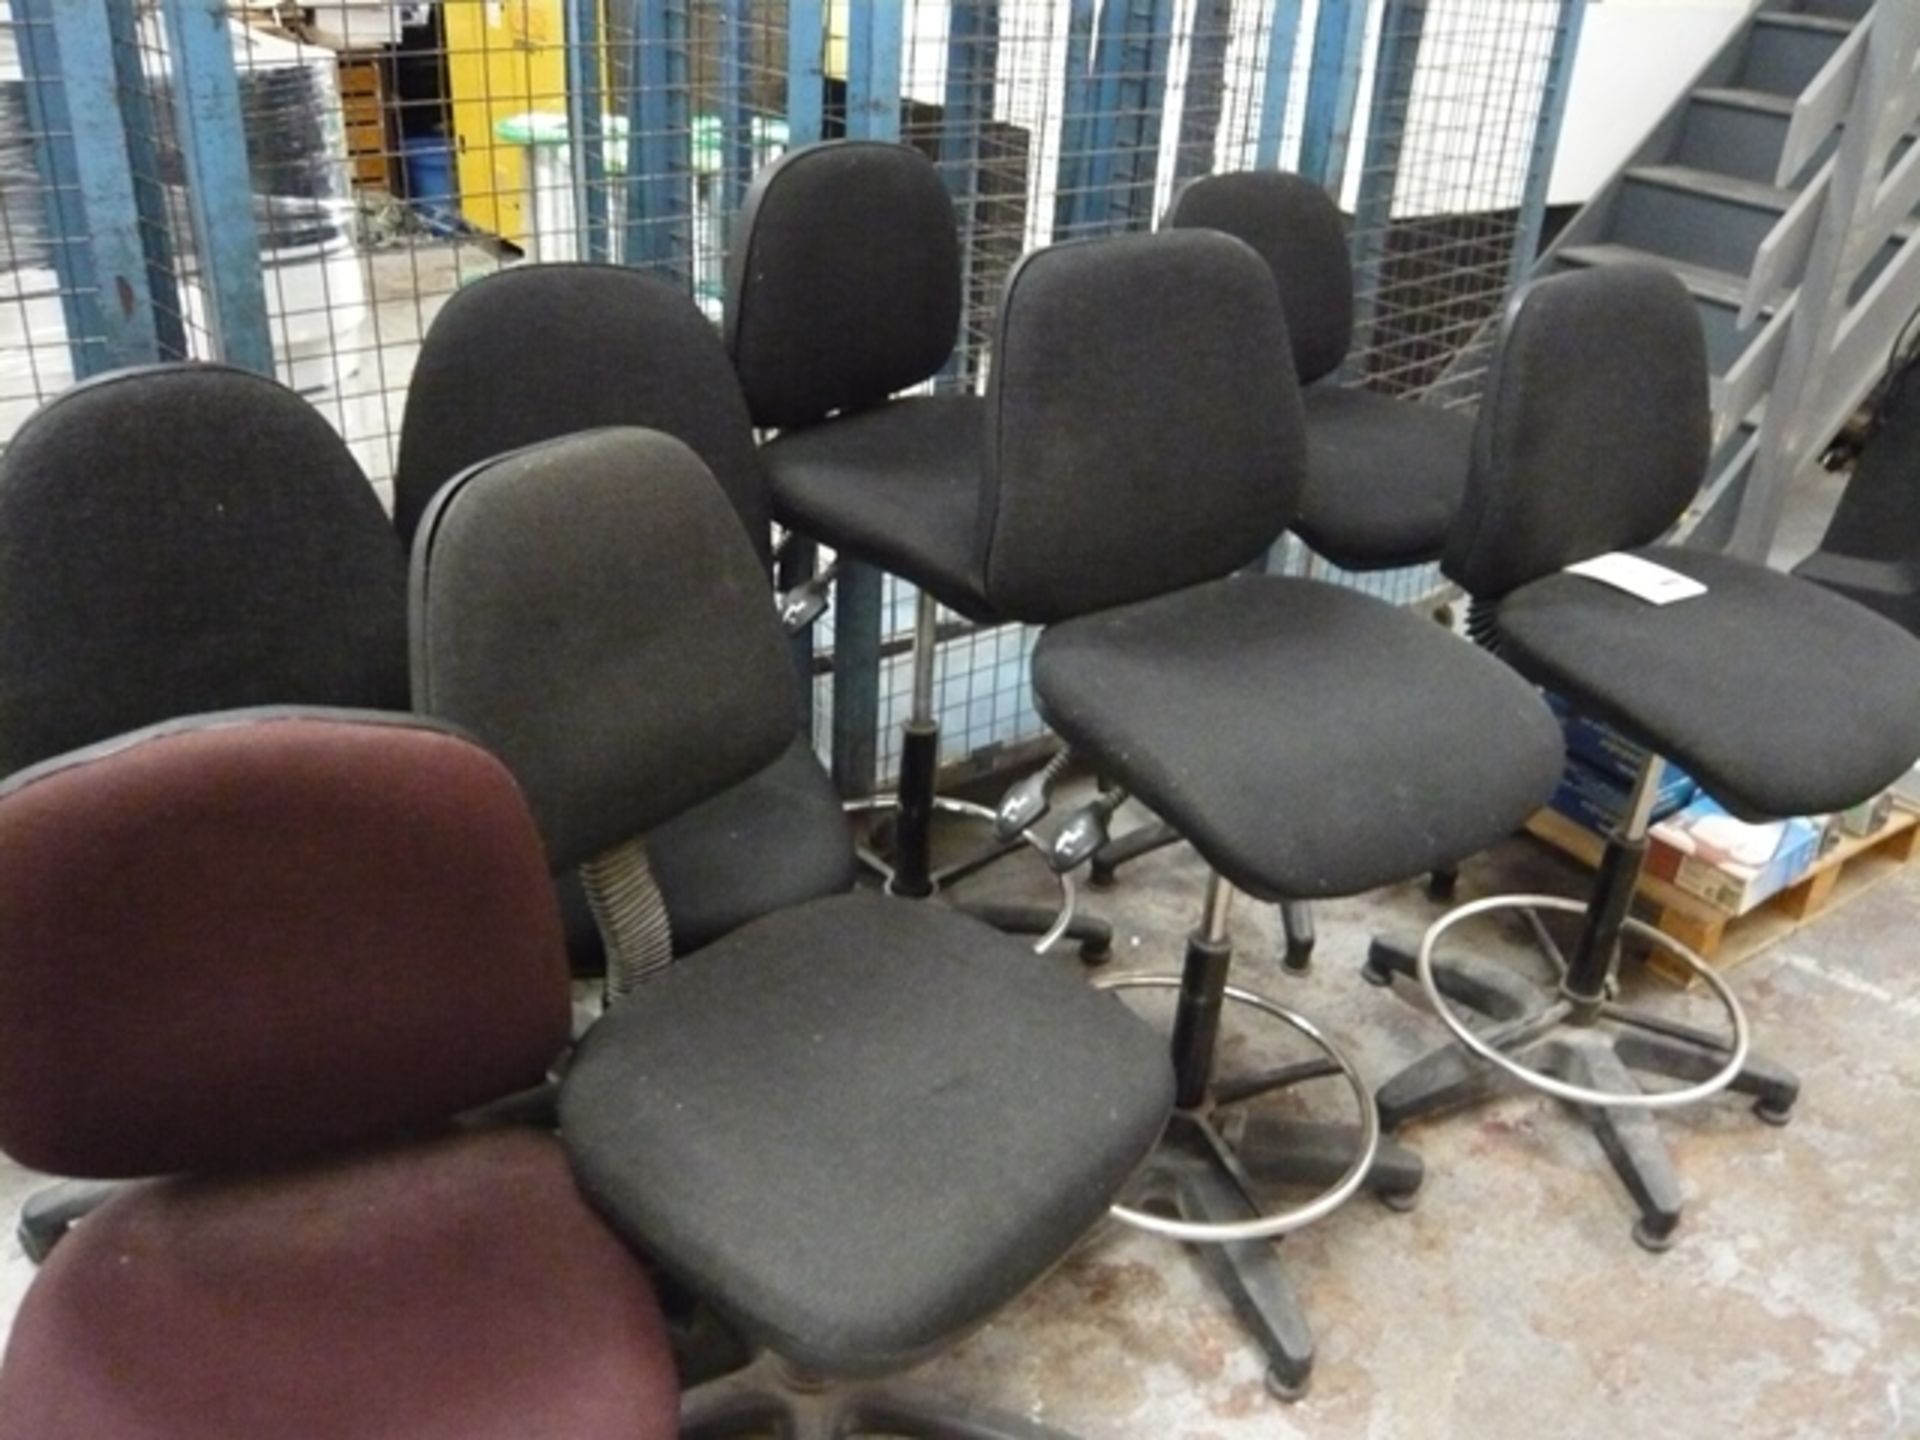 4 operator stools and 4 operator chairs. NB: This item has no record of Thorough Examination. The